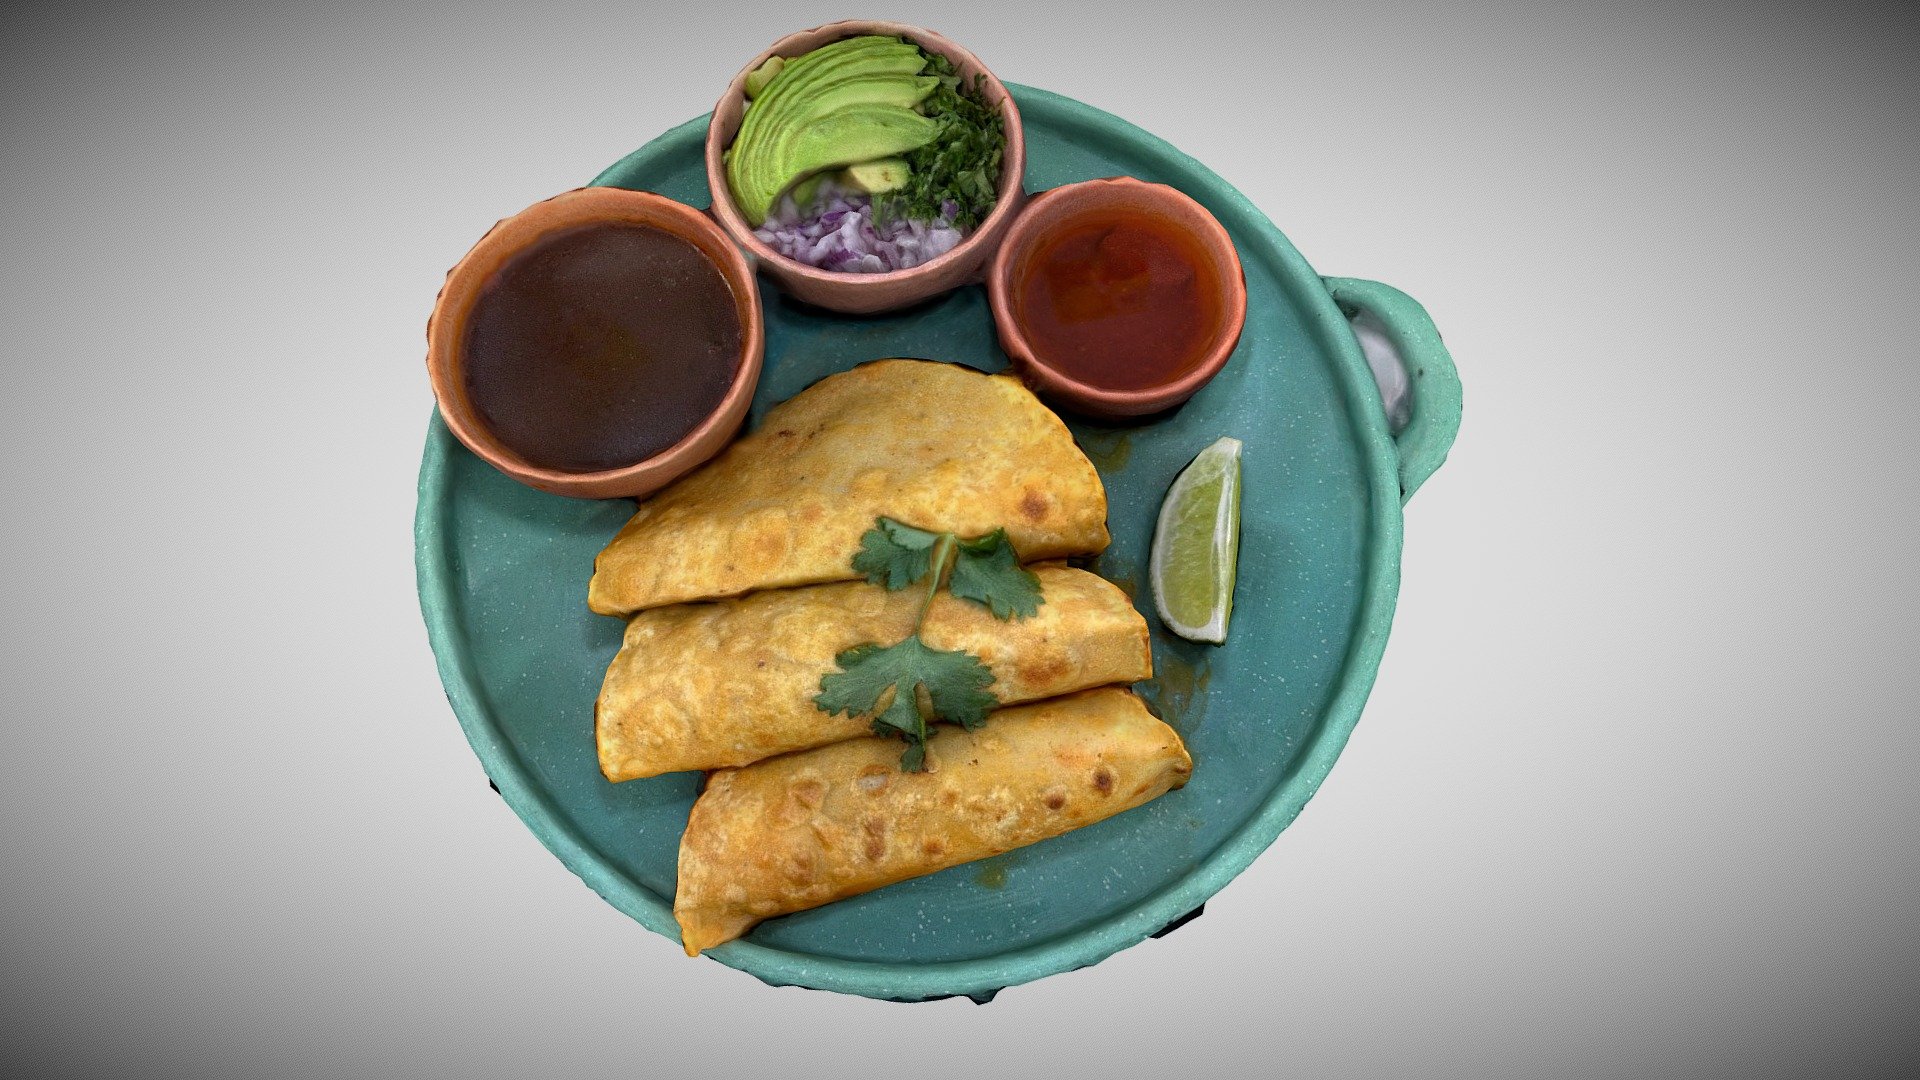 Slow-cooked lamb &amp; queso Oaxaca quesadillas |  avocado | sesame seed &amp; chile de árbol salsa | lamb jus - Quesabirria - Buy Royalty Free 3D model by Augmented Reality Marketing Solutions LLC (@AugRealMarketing) 3d model